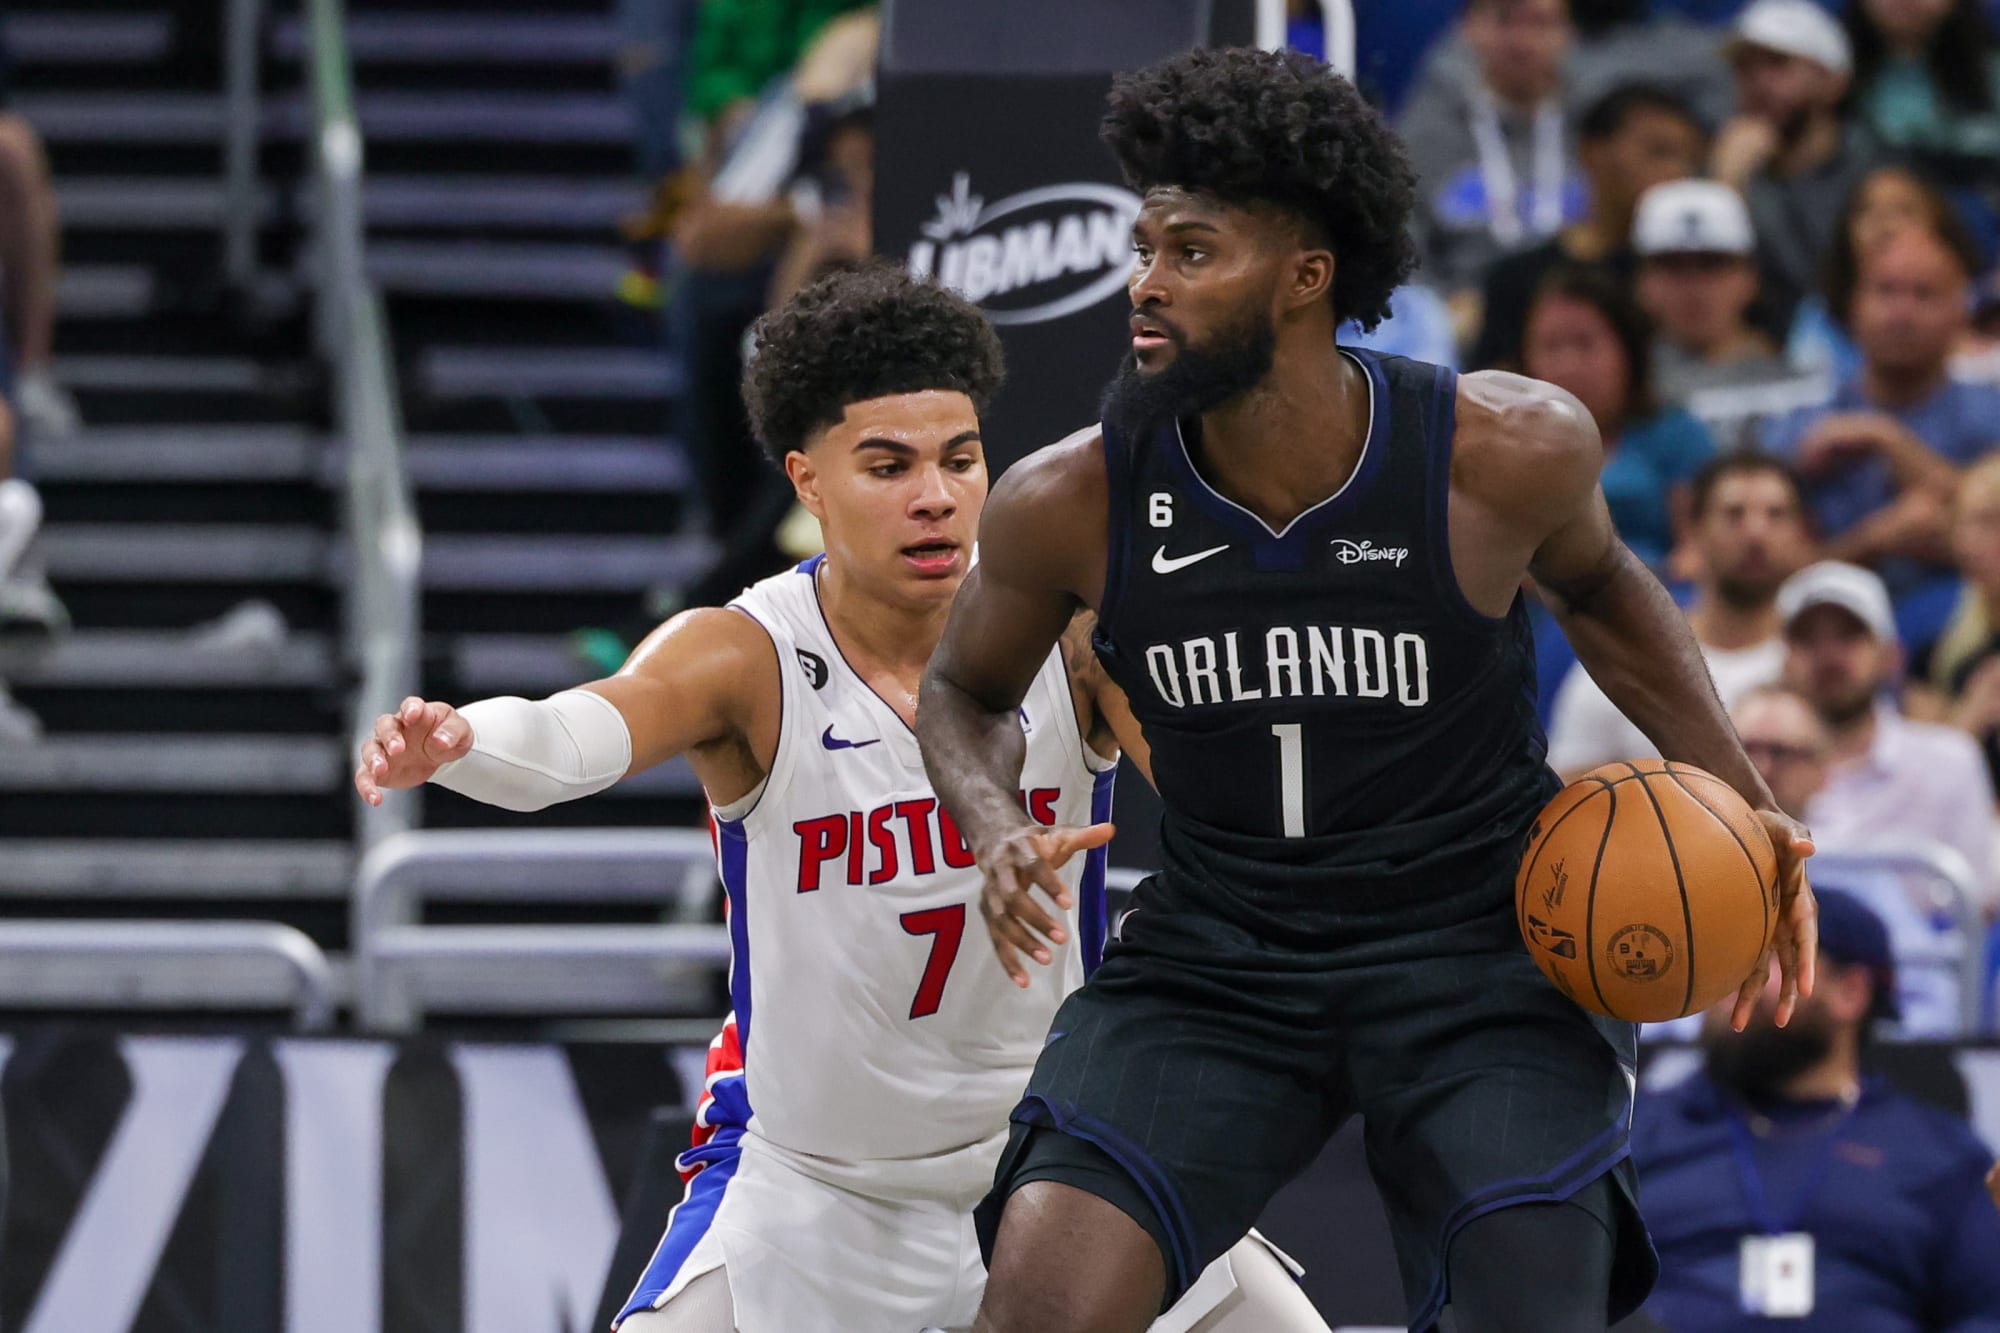 Opening Night Preview of the Orlando Magic vs Detroit Pistons - FL Teams